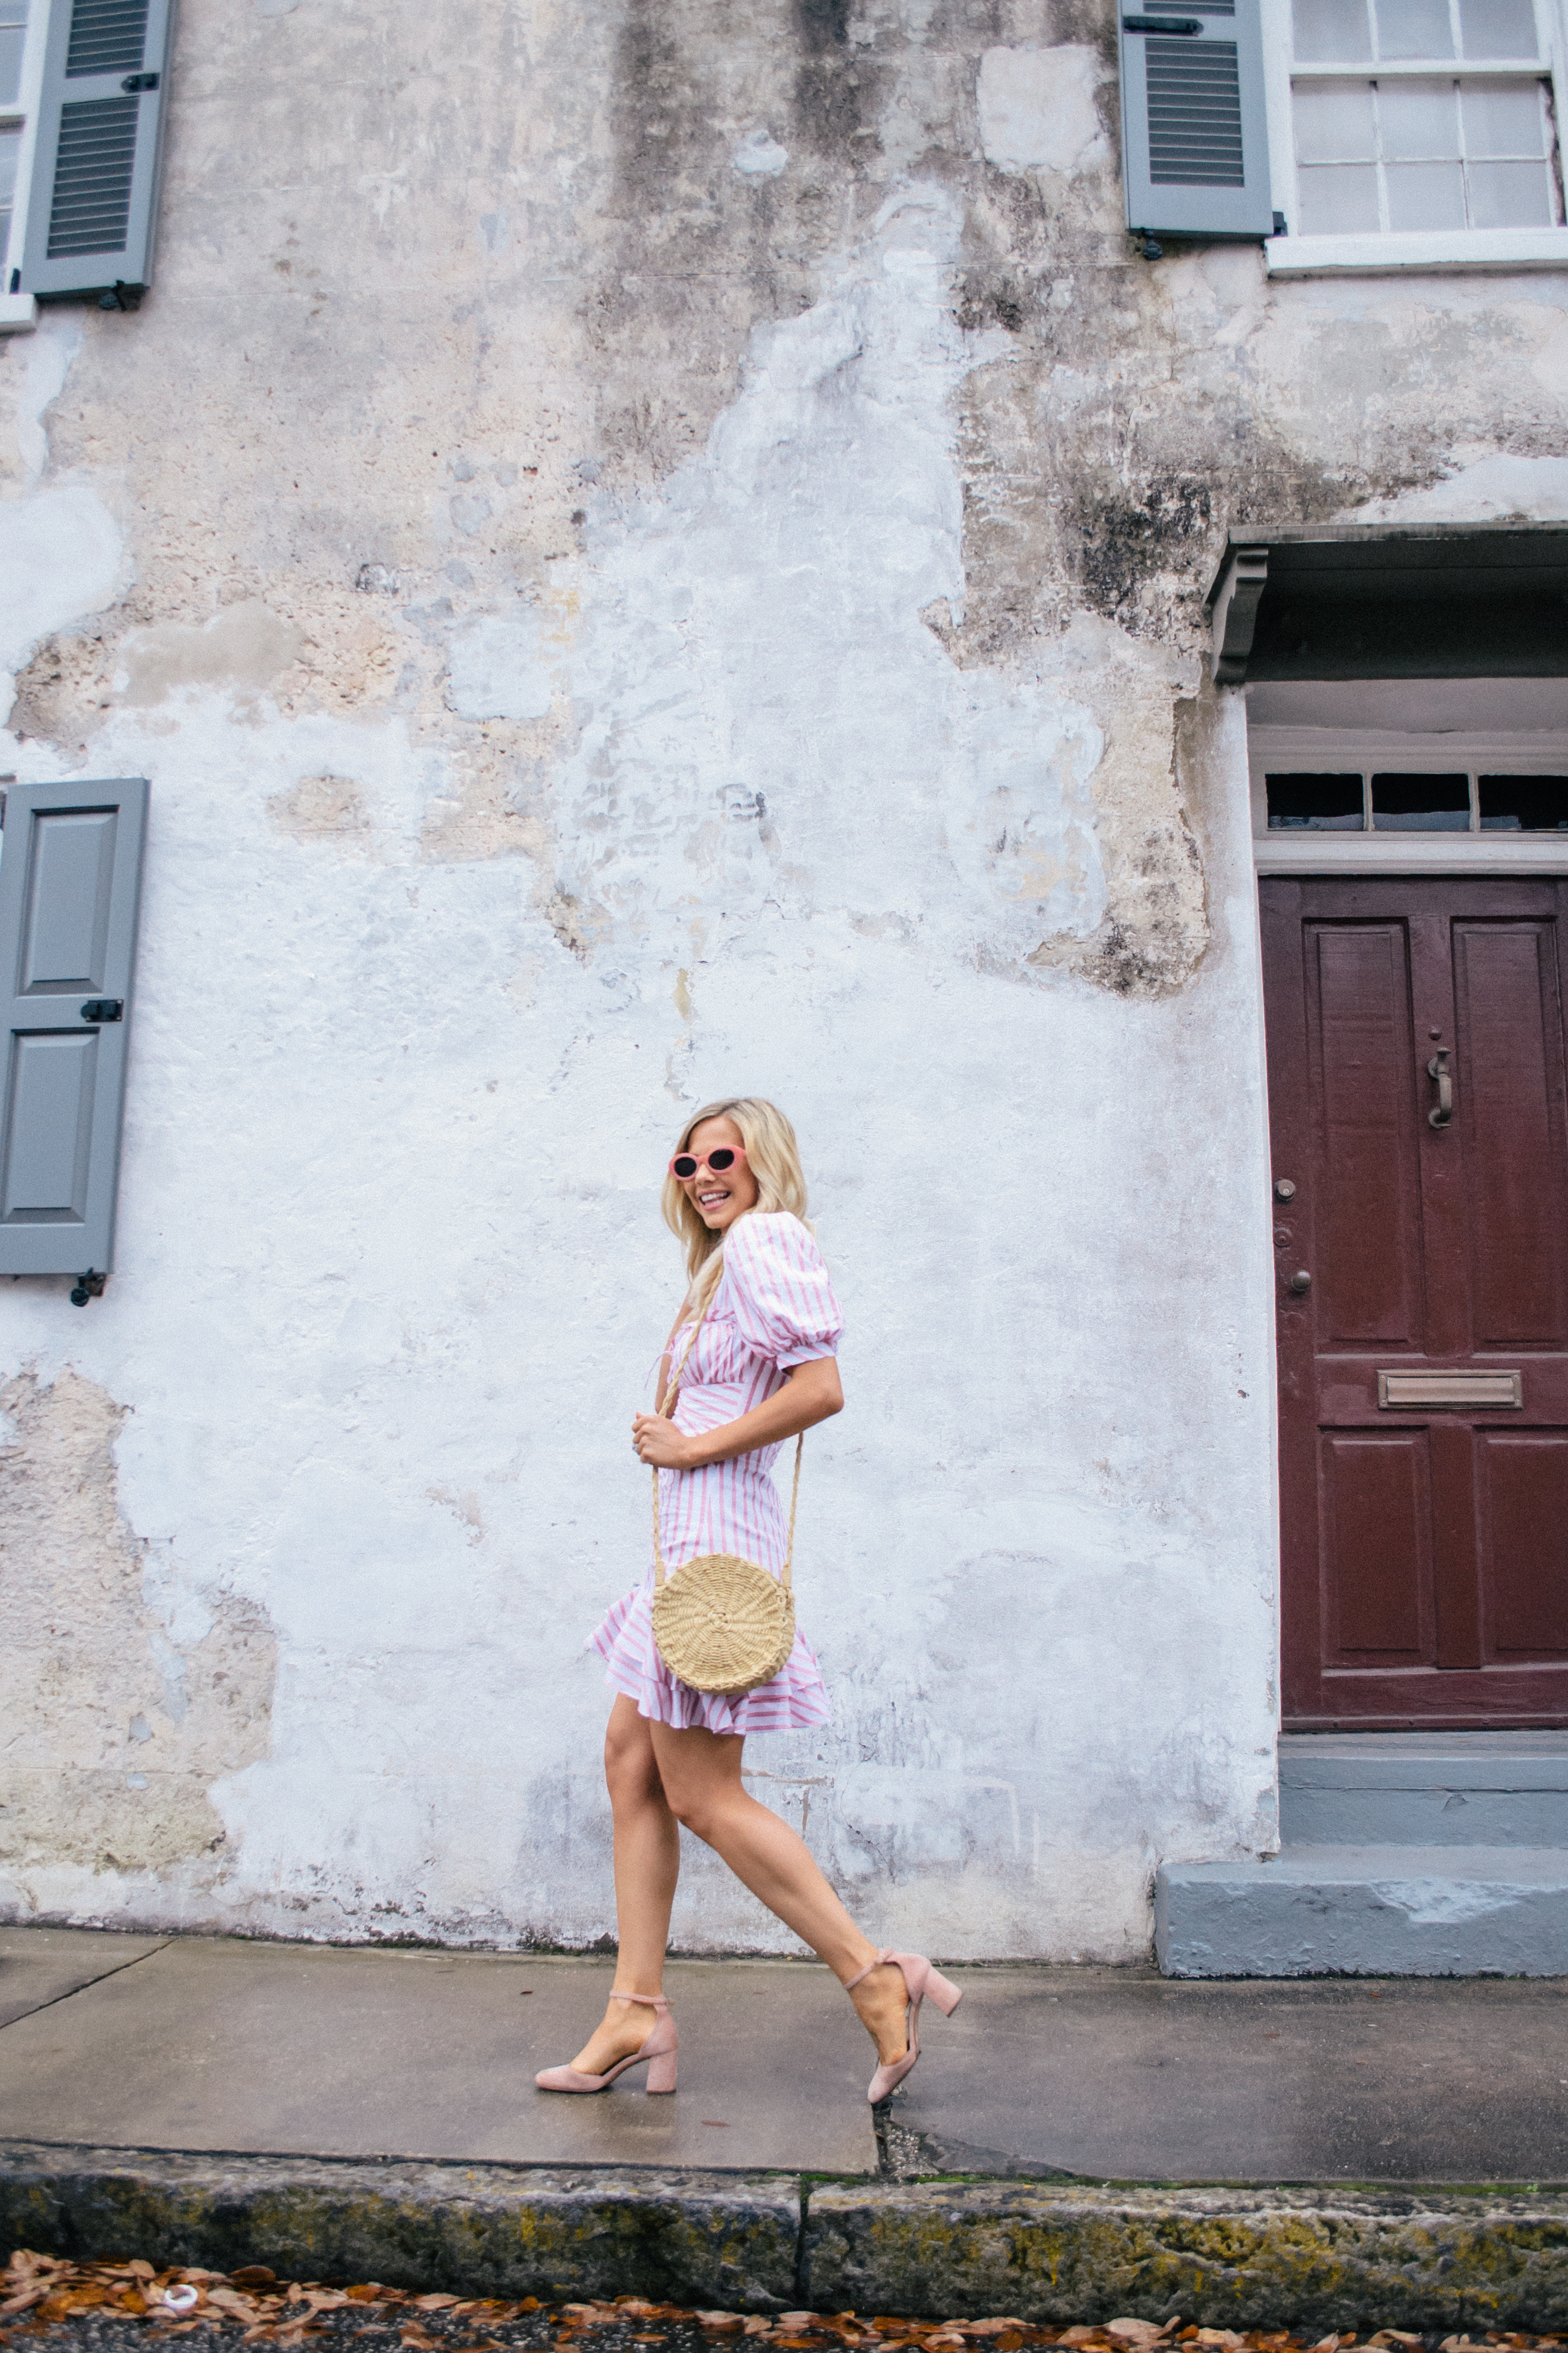 charleston blogger, spring style, woven bags for spring #charleston #spring #style